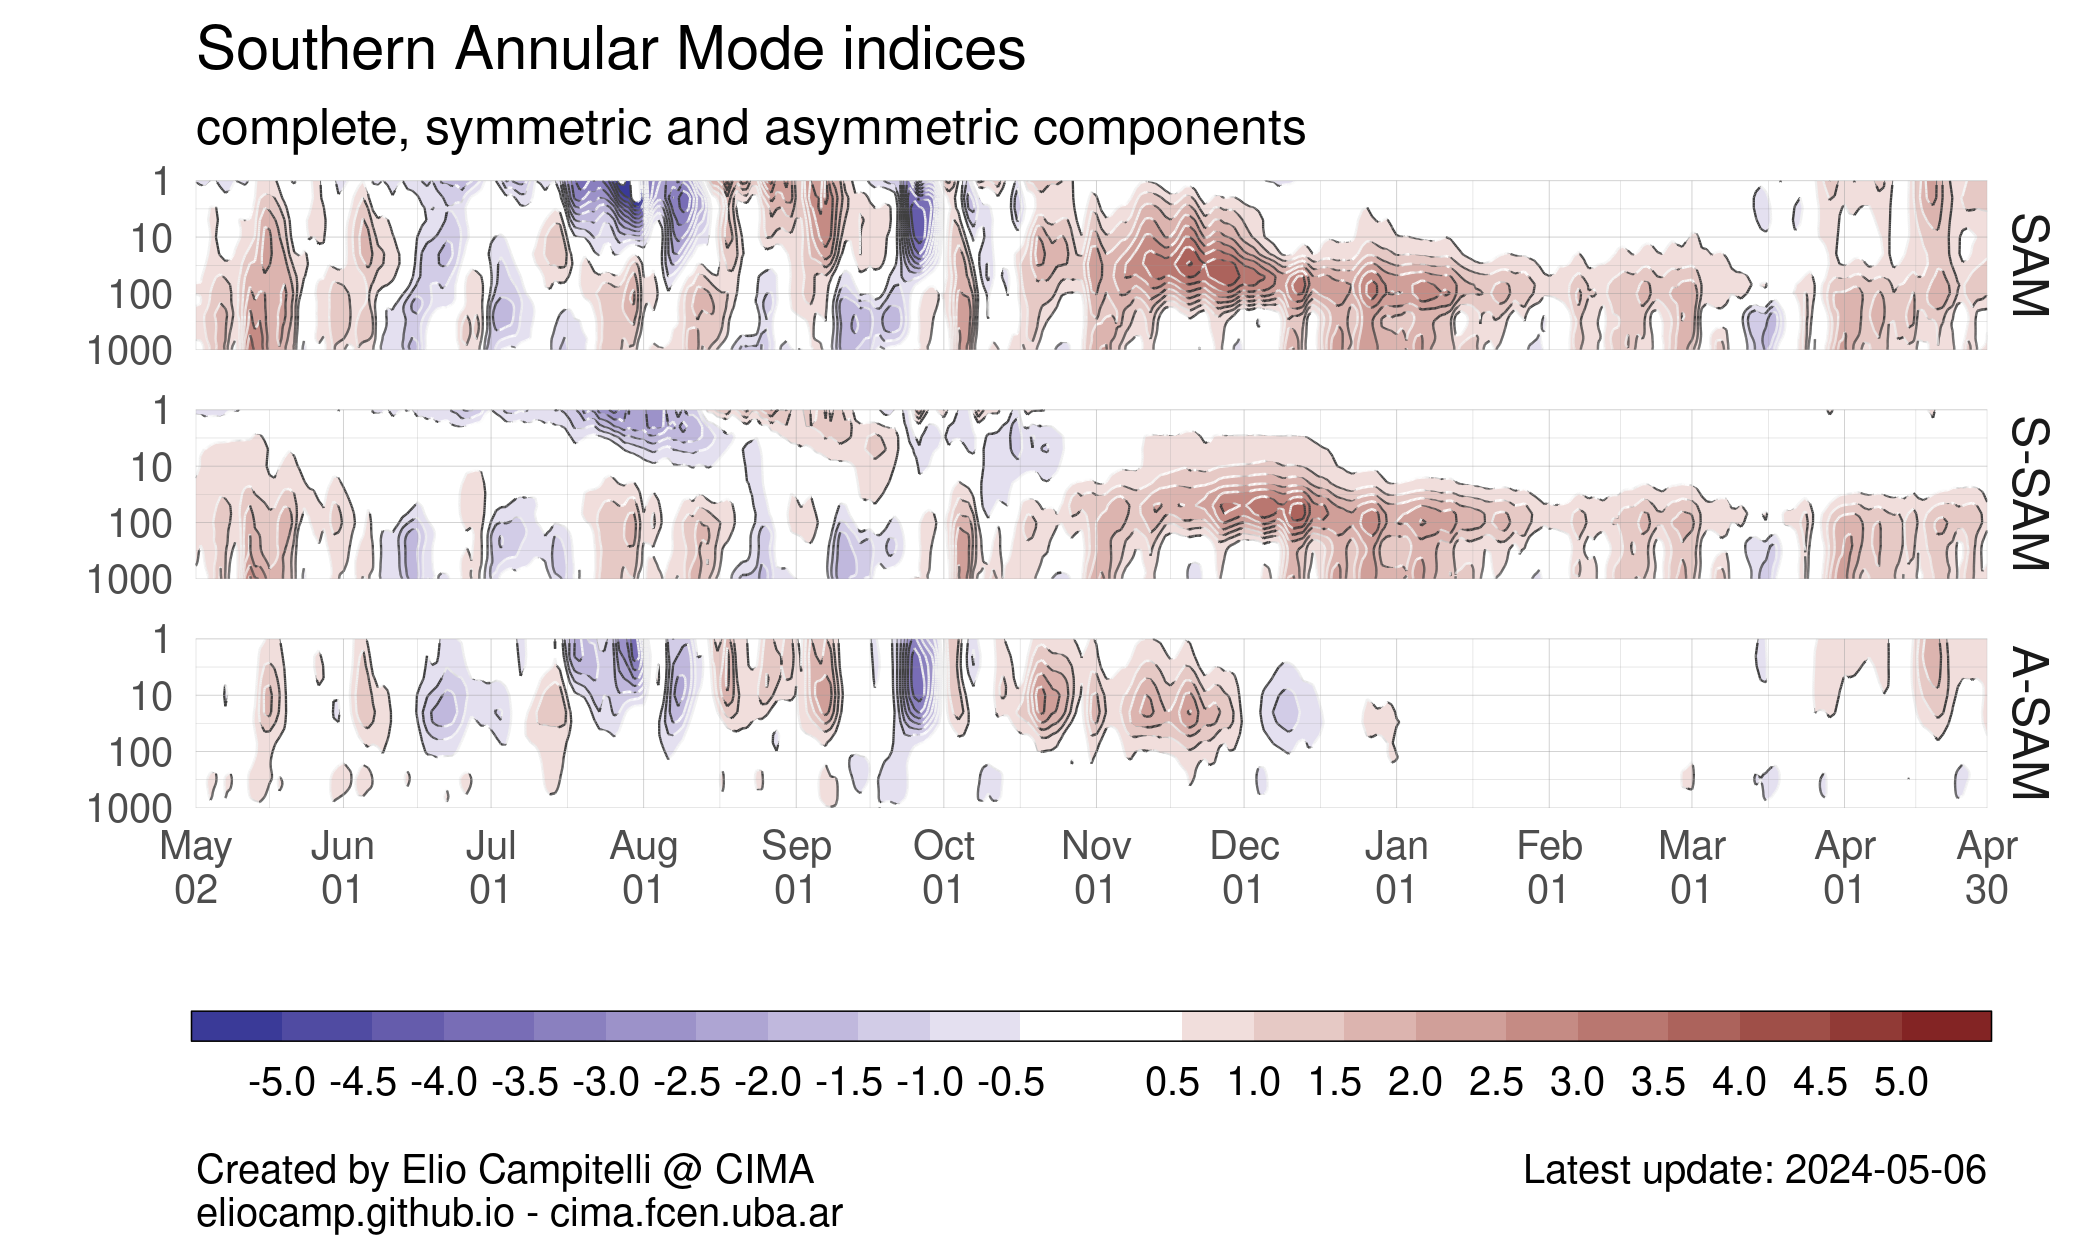 Vertical cross-section of the SAM, S-SAM and A-SAM indices for the last 12 months.